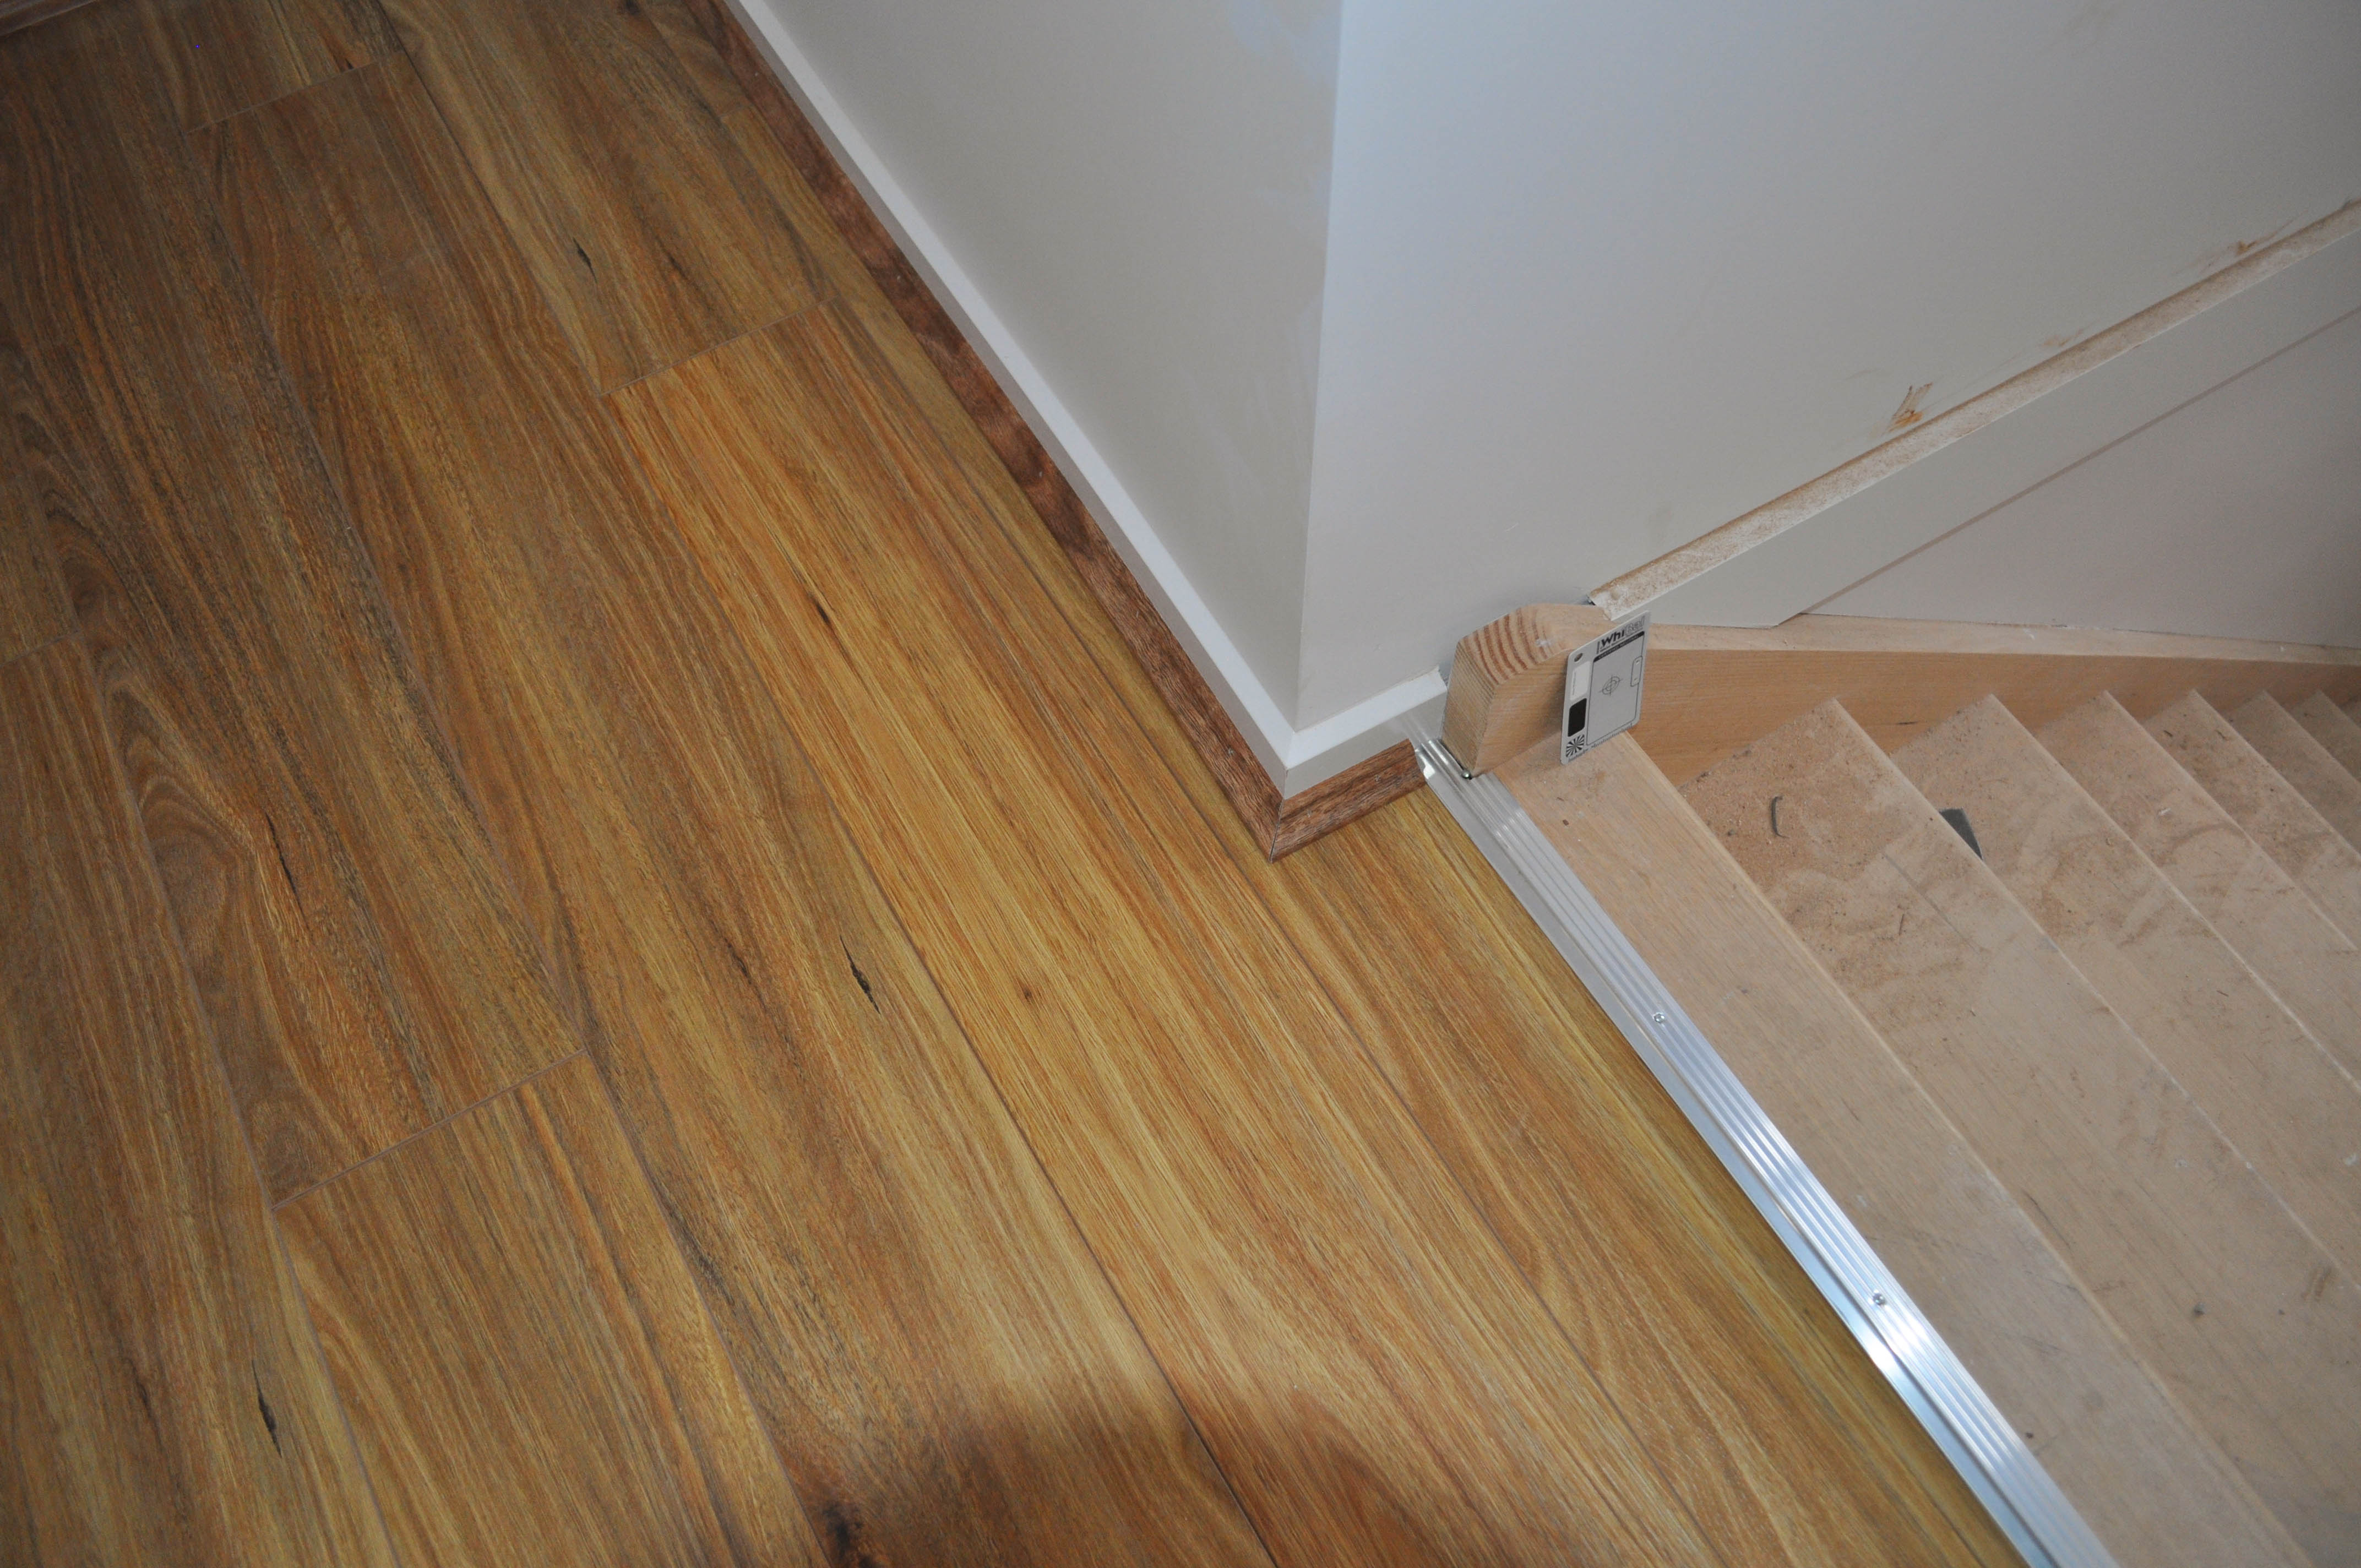 showing a room with a staircase running of it, in which laminate flooring installation has been completed.